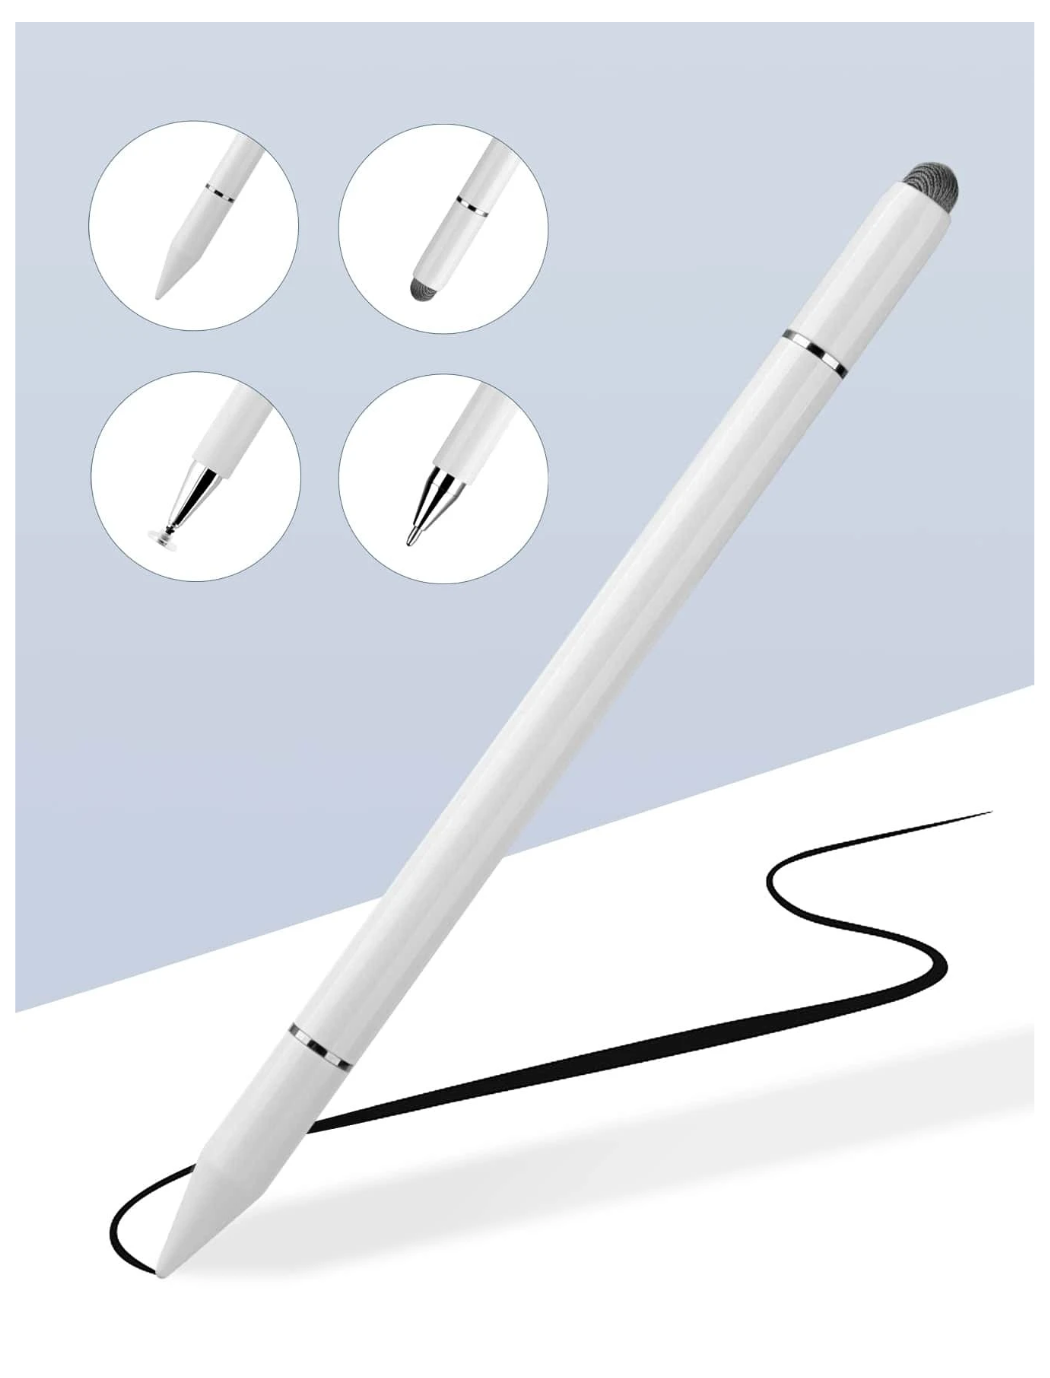 Touch of Elegance: 1pc White 3-In-1 Touchscreen Stylus Pen – Compatible, Magnetic, and Ready to Elevate Your Digital Experience!